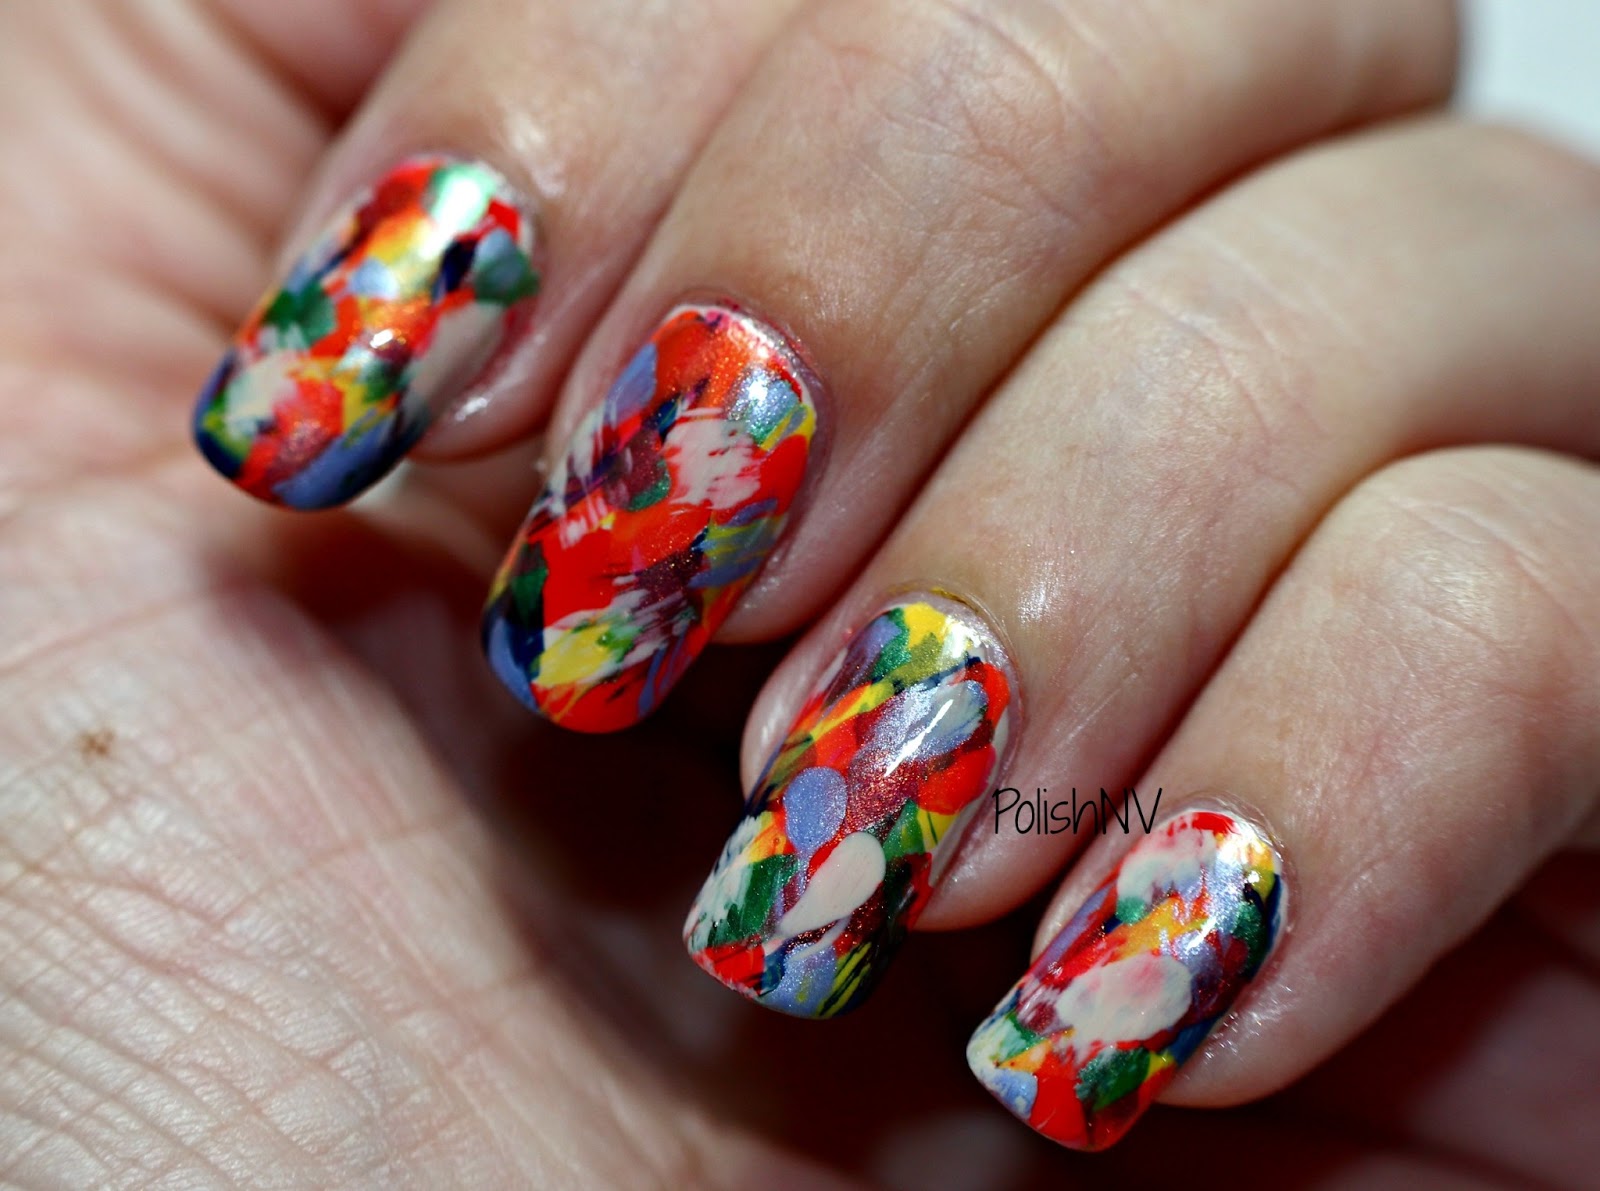 Abstract Nail Art with Sponge Technique - wide 3